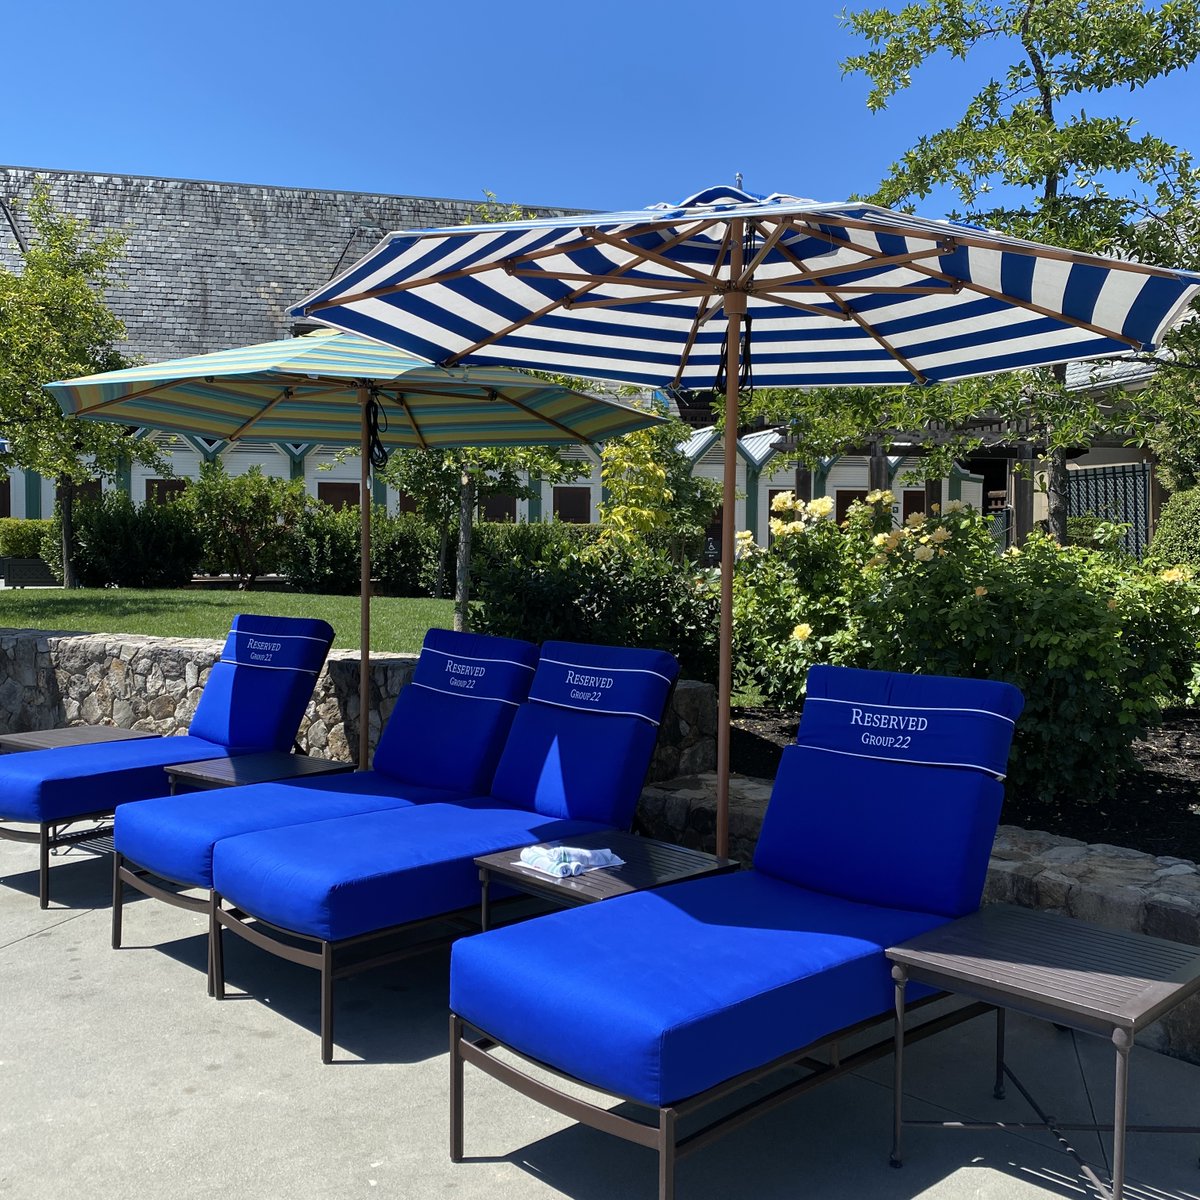 Have a great 4th! Whether you find a poolside chair or a bbq, have a happy, safe and wonderful celebration today! 

#winecountrydetours #discovernapa #outdoorwinetasting #napavalley #sonoma #napawines #sonomawines